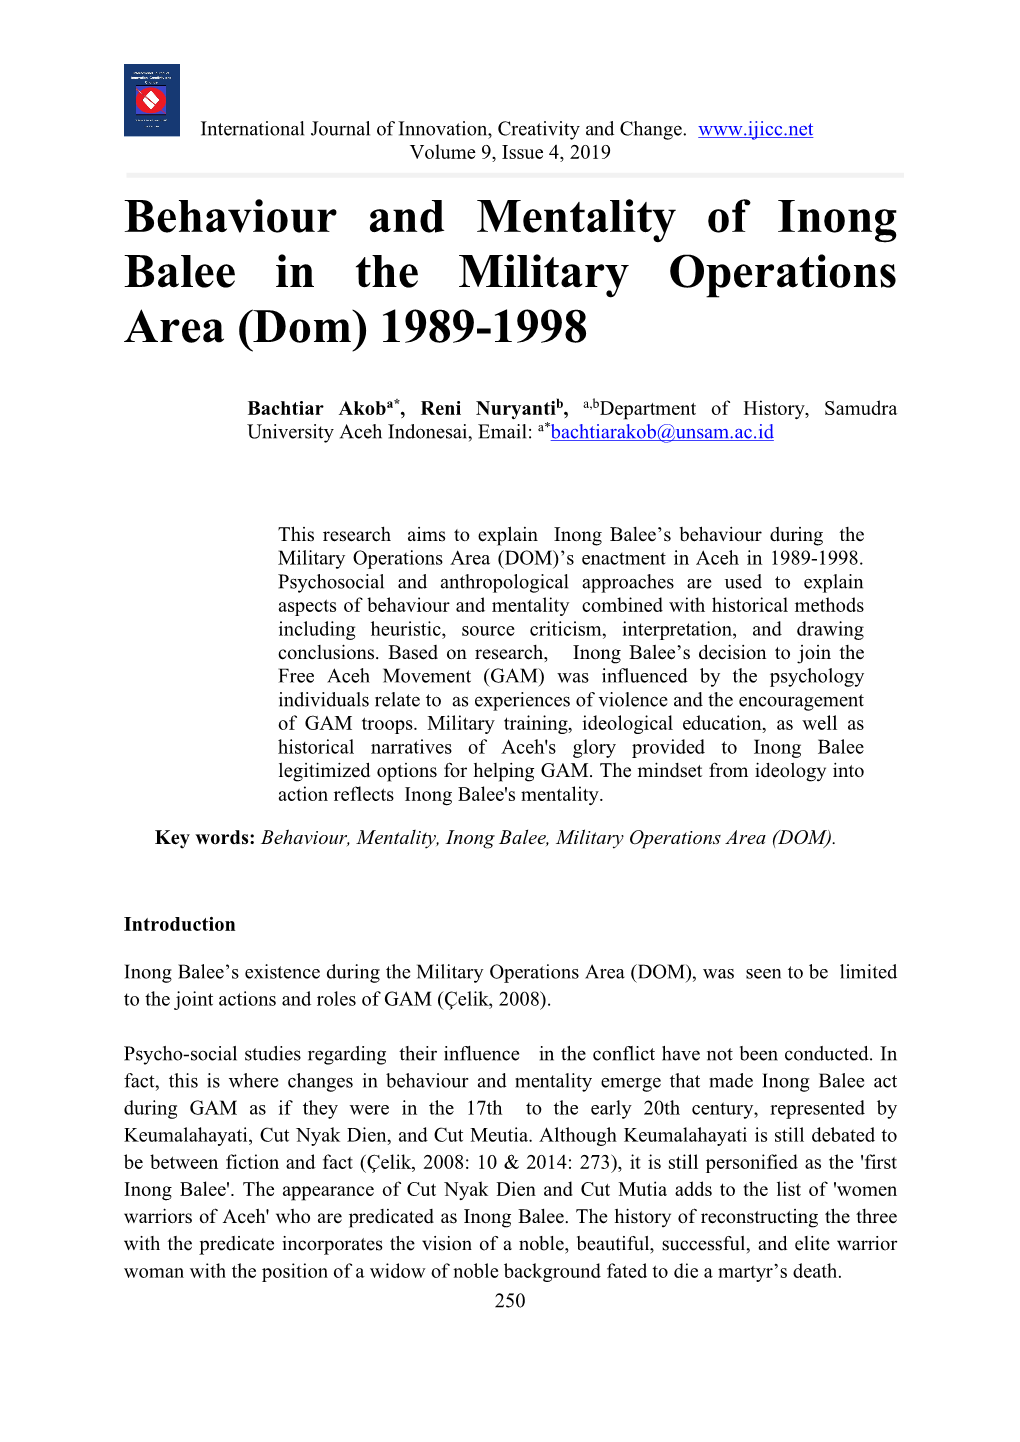 Behaviour and Mentality of Inong Balee in the Military Operations Area (Dom) 1989-1998